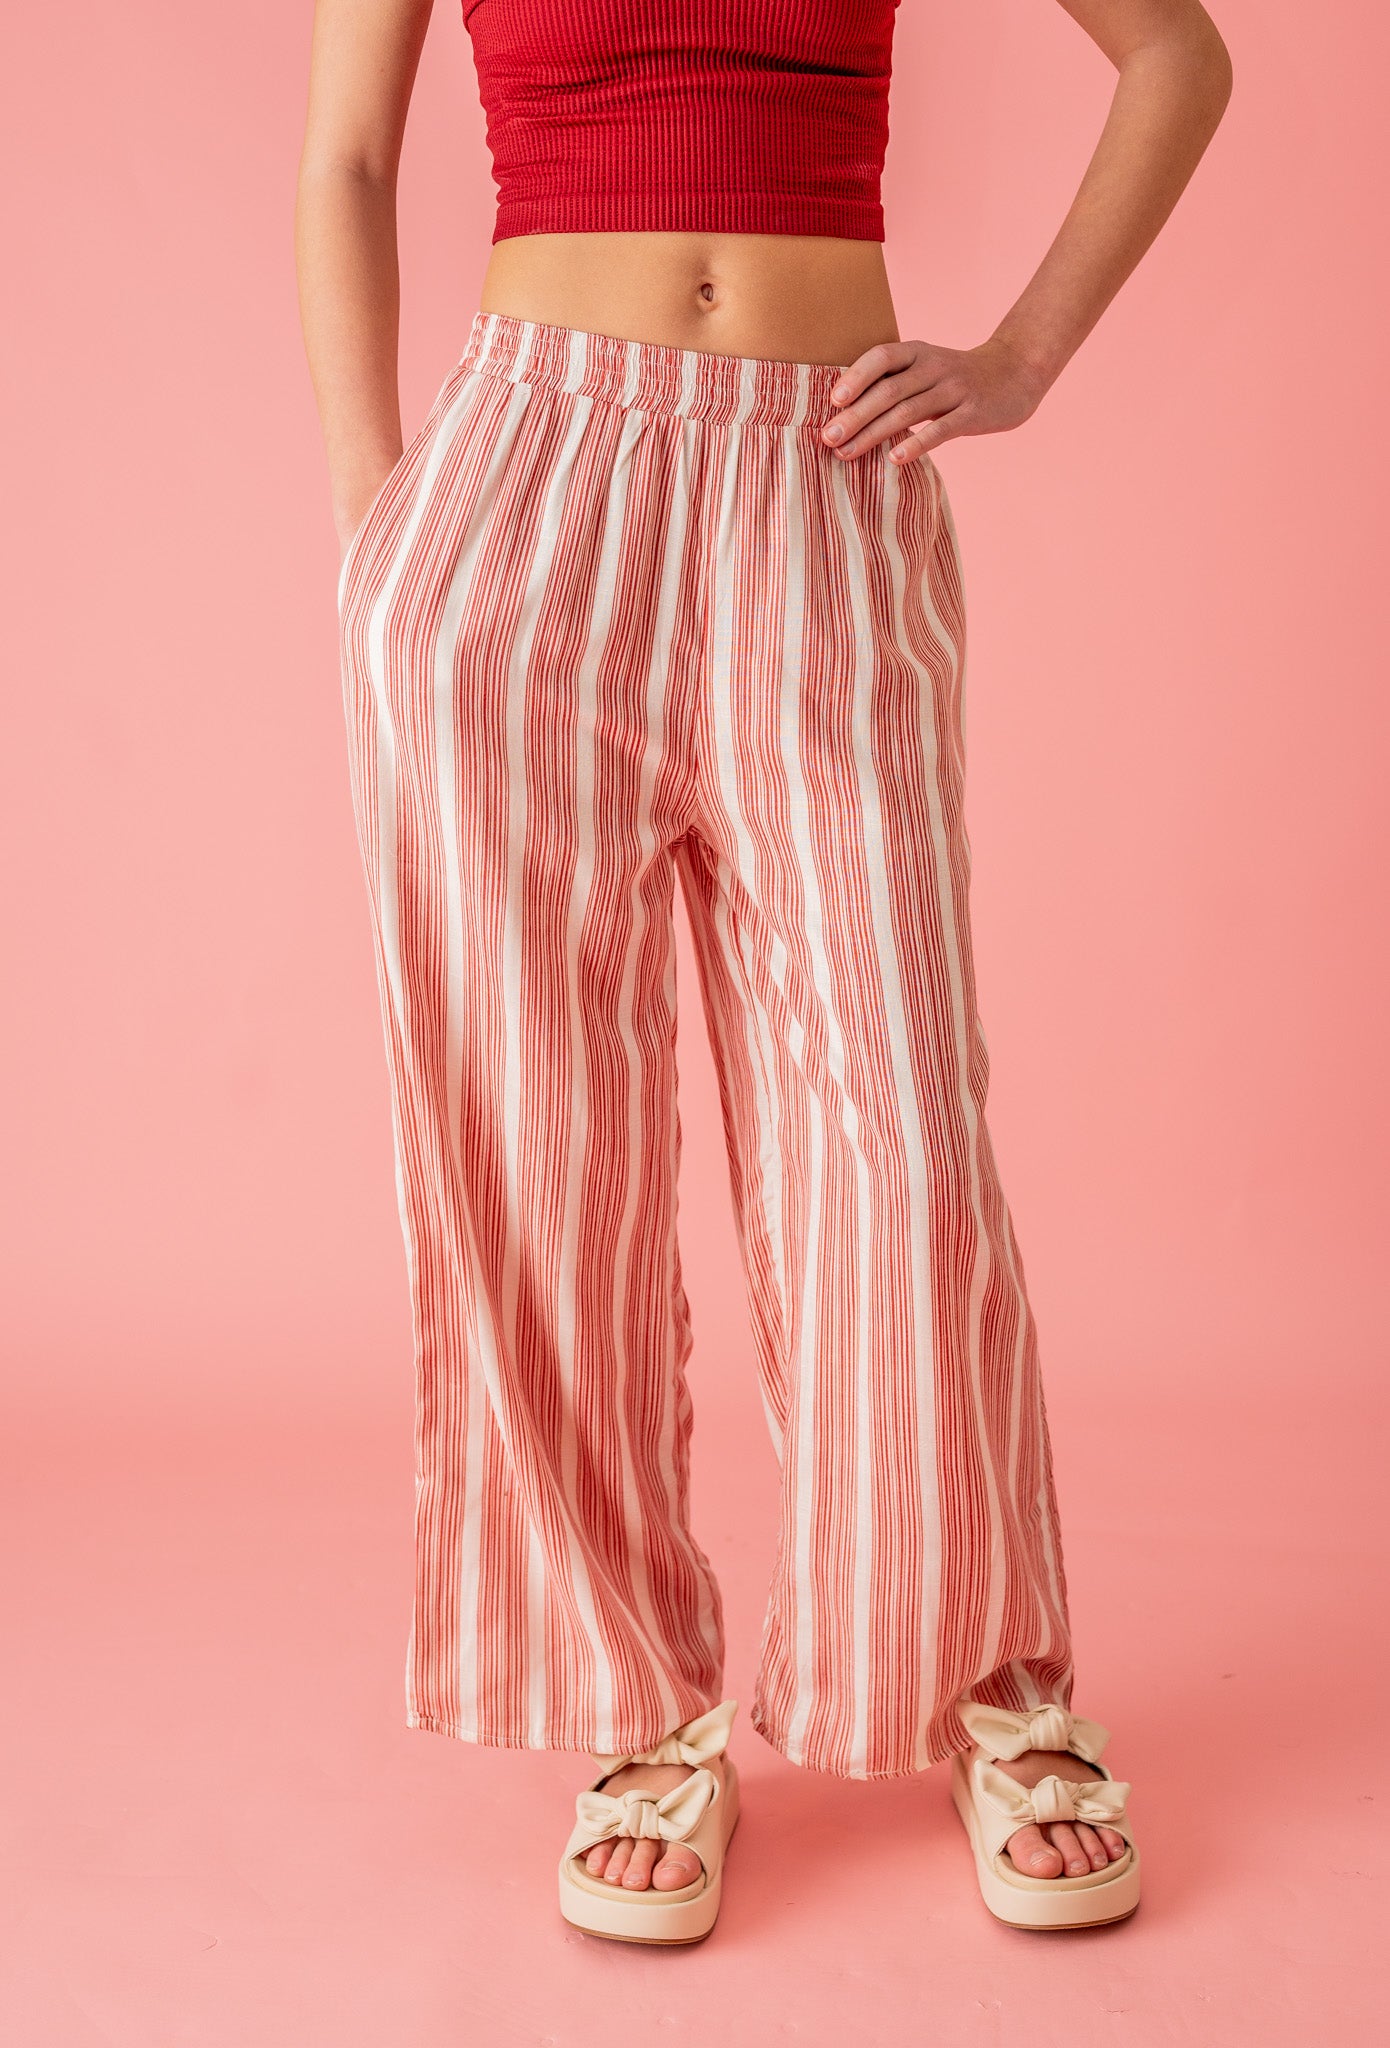 Candy Stripe Flare Bottoms